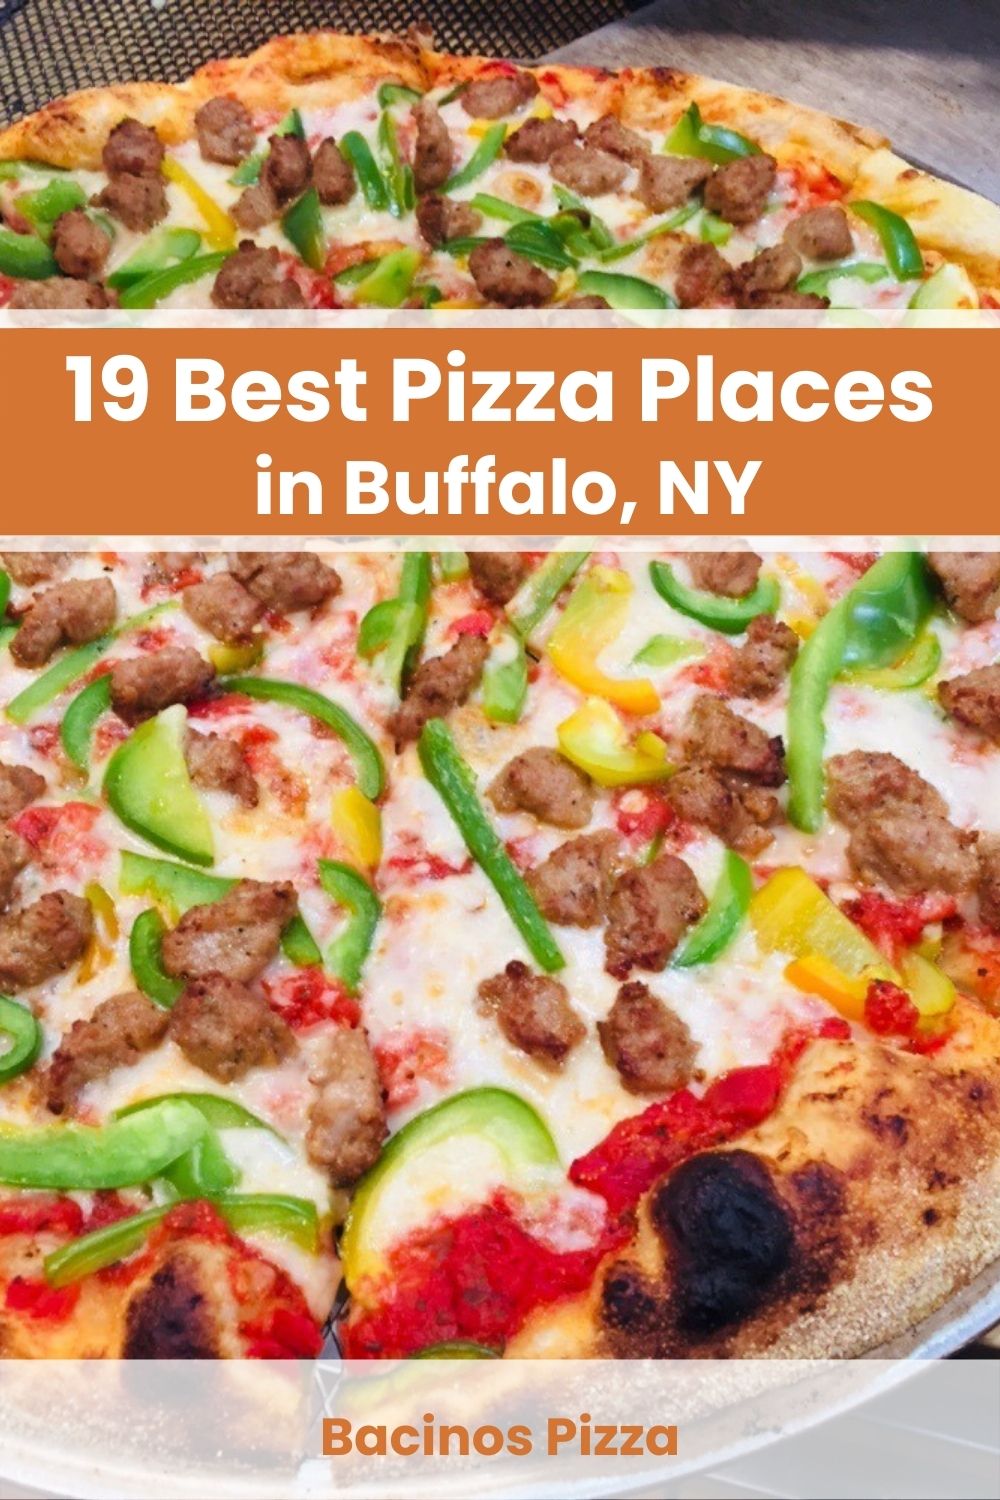 Best Pizza Places in Buffalo